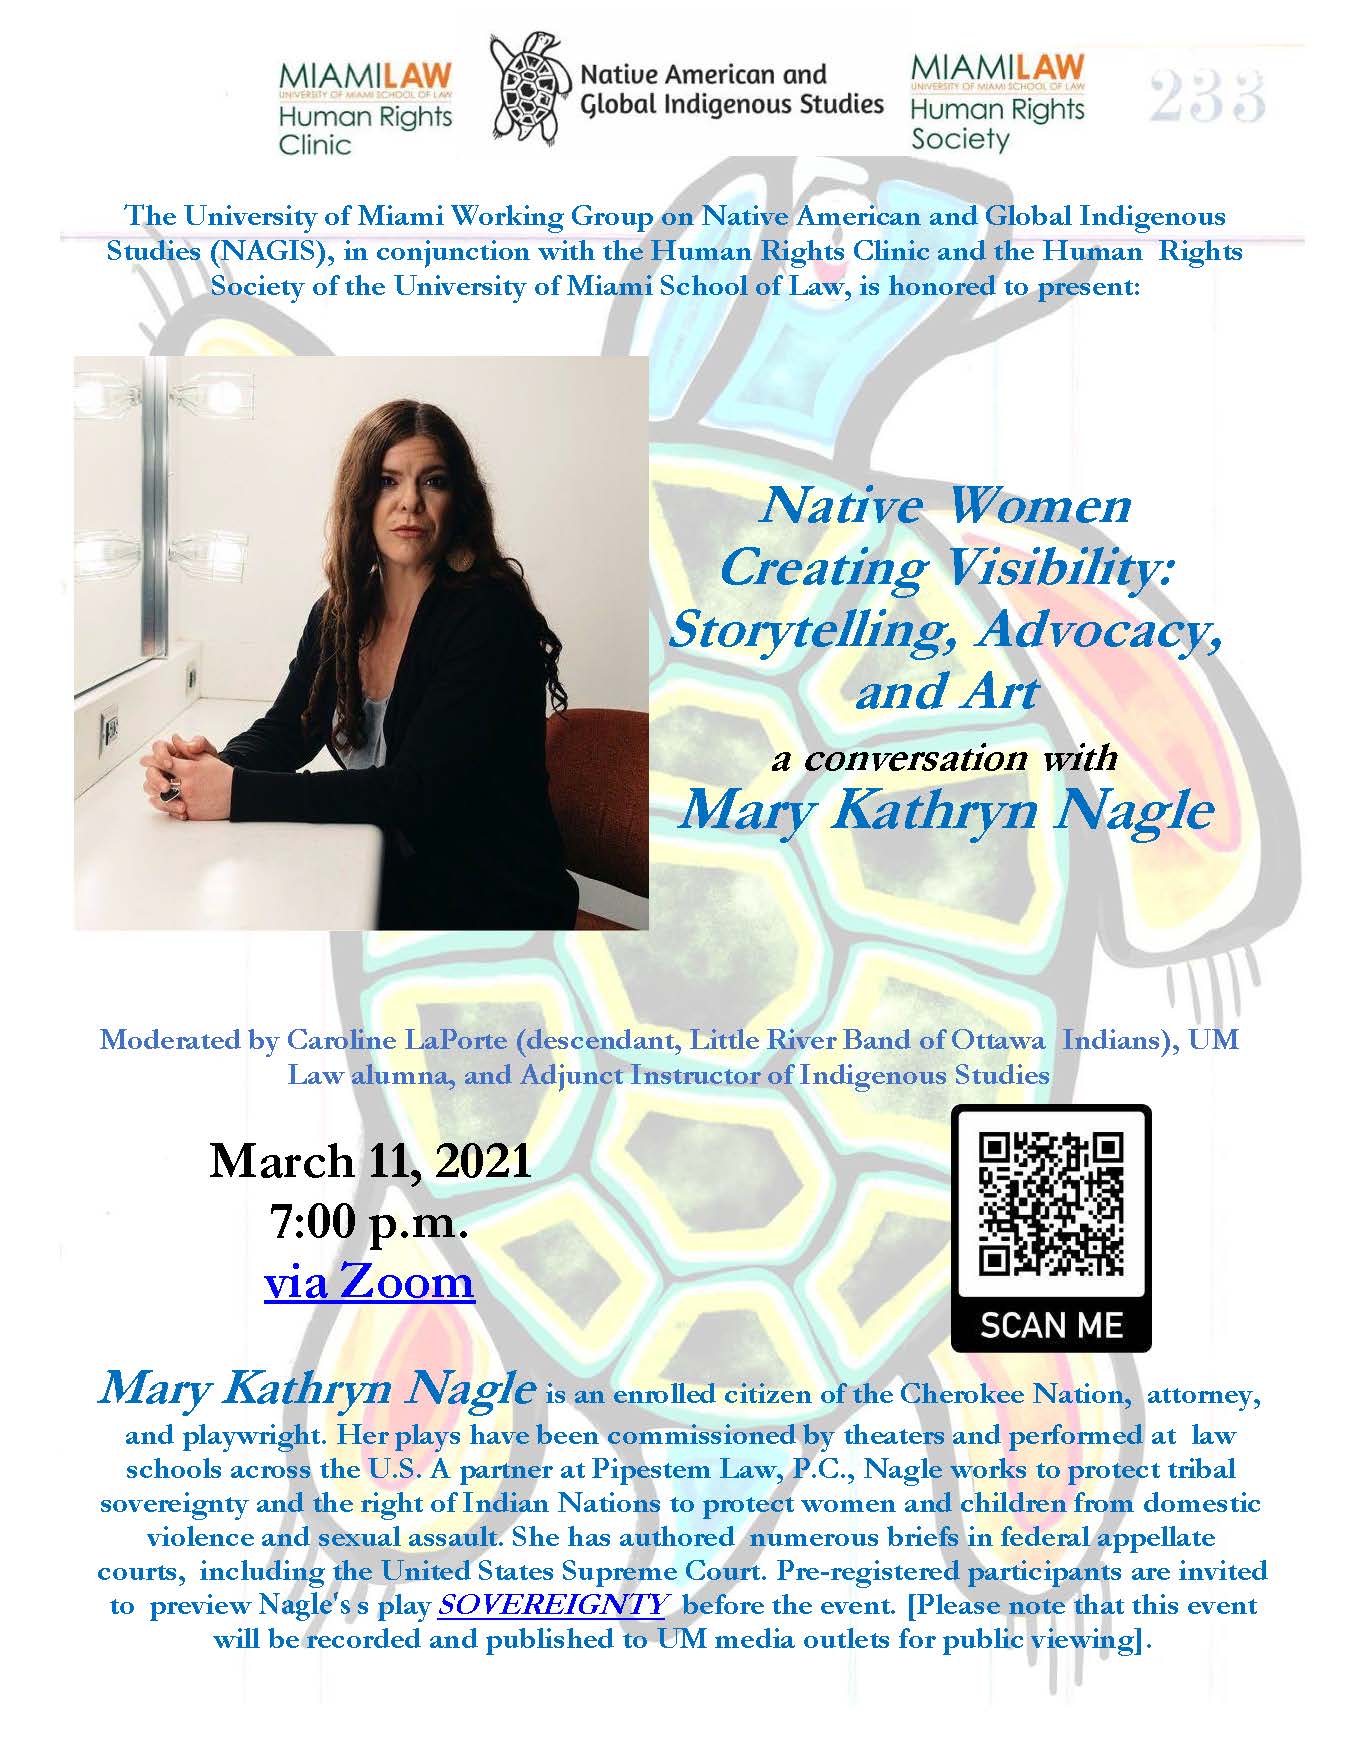 This is a flyer for the virtual discussion with Mary Kathryn Nagle.